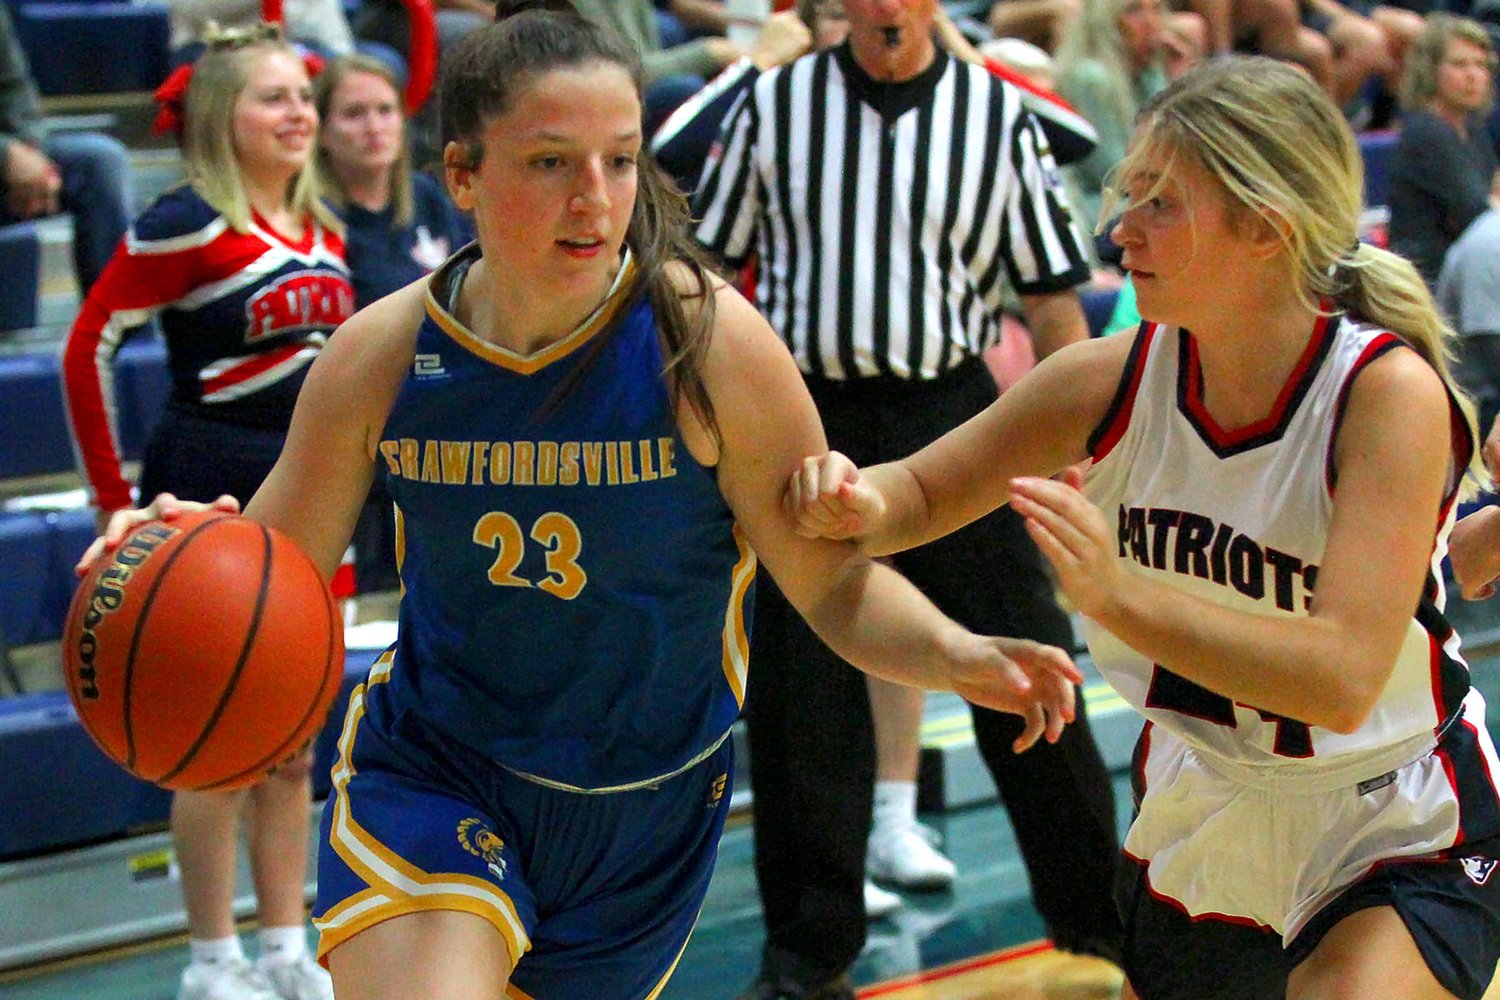 Taylor Abston of Crawfordsville keeps Rylea Wetz of Seeger at a distance on a drive to the basket. Abston ended the game with 15 points to lead CHS.